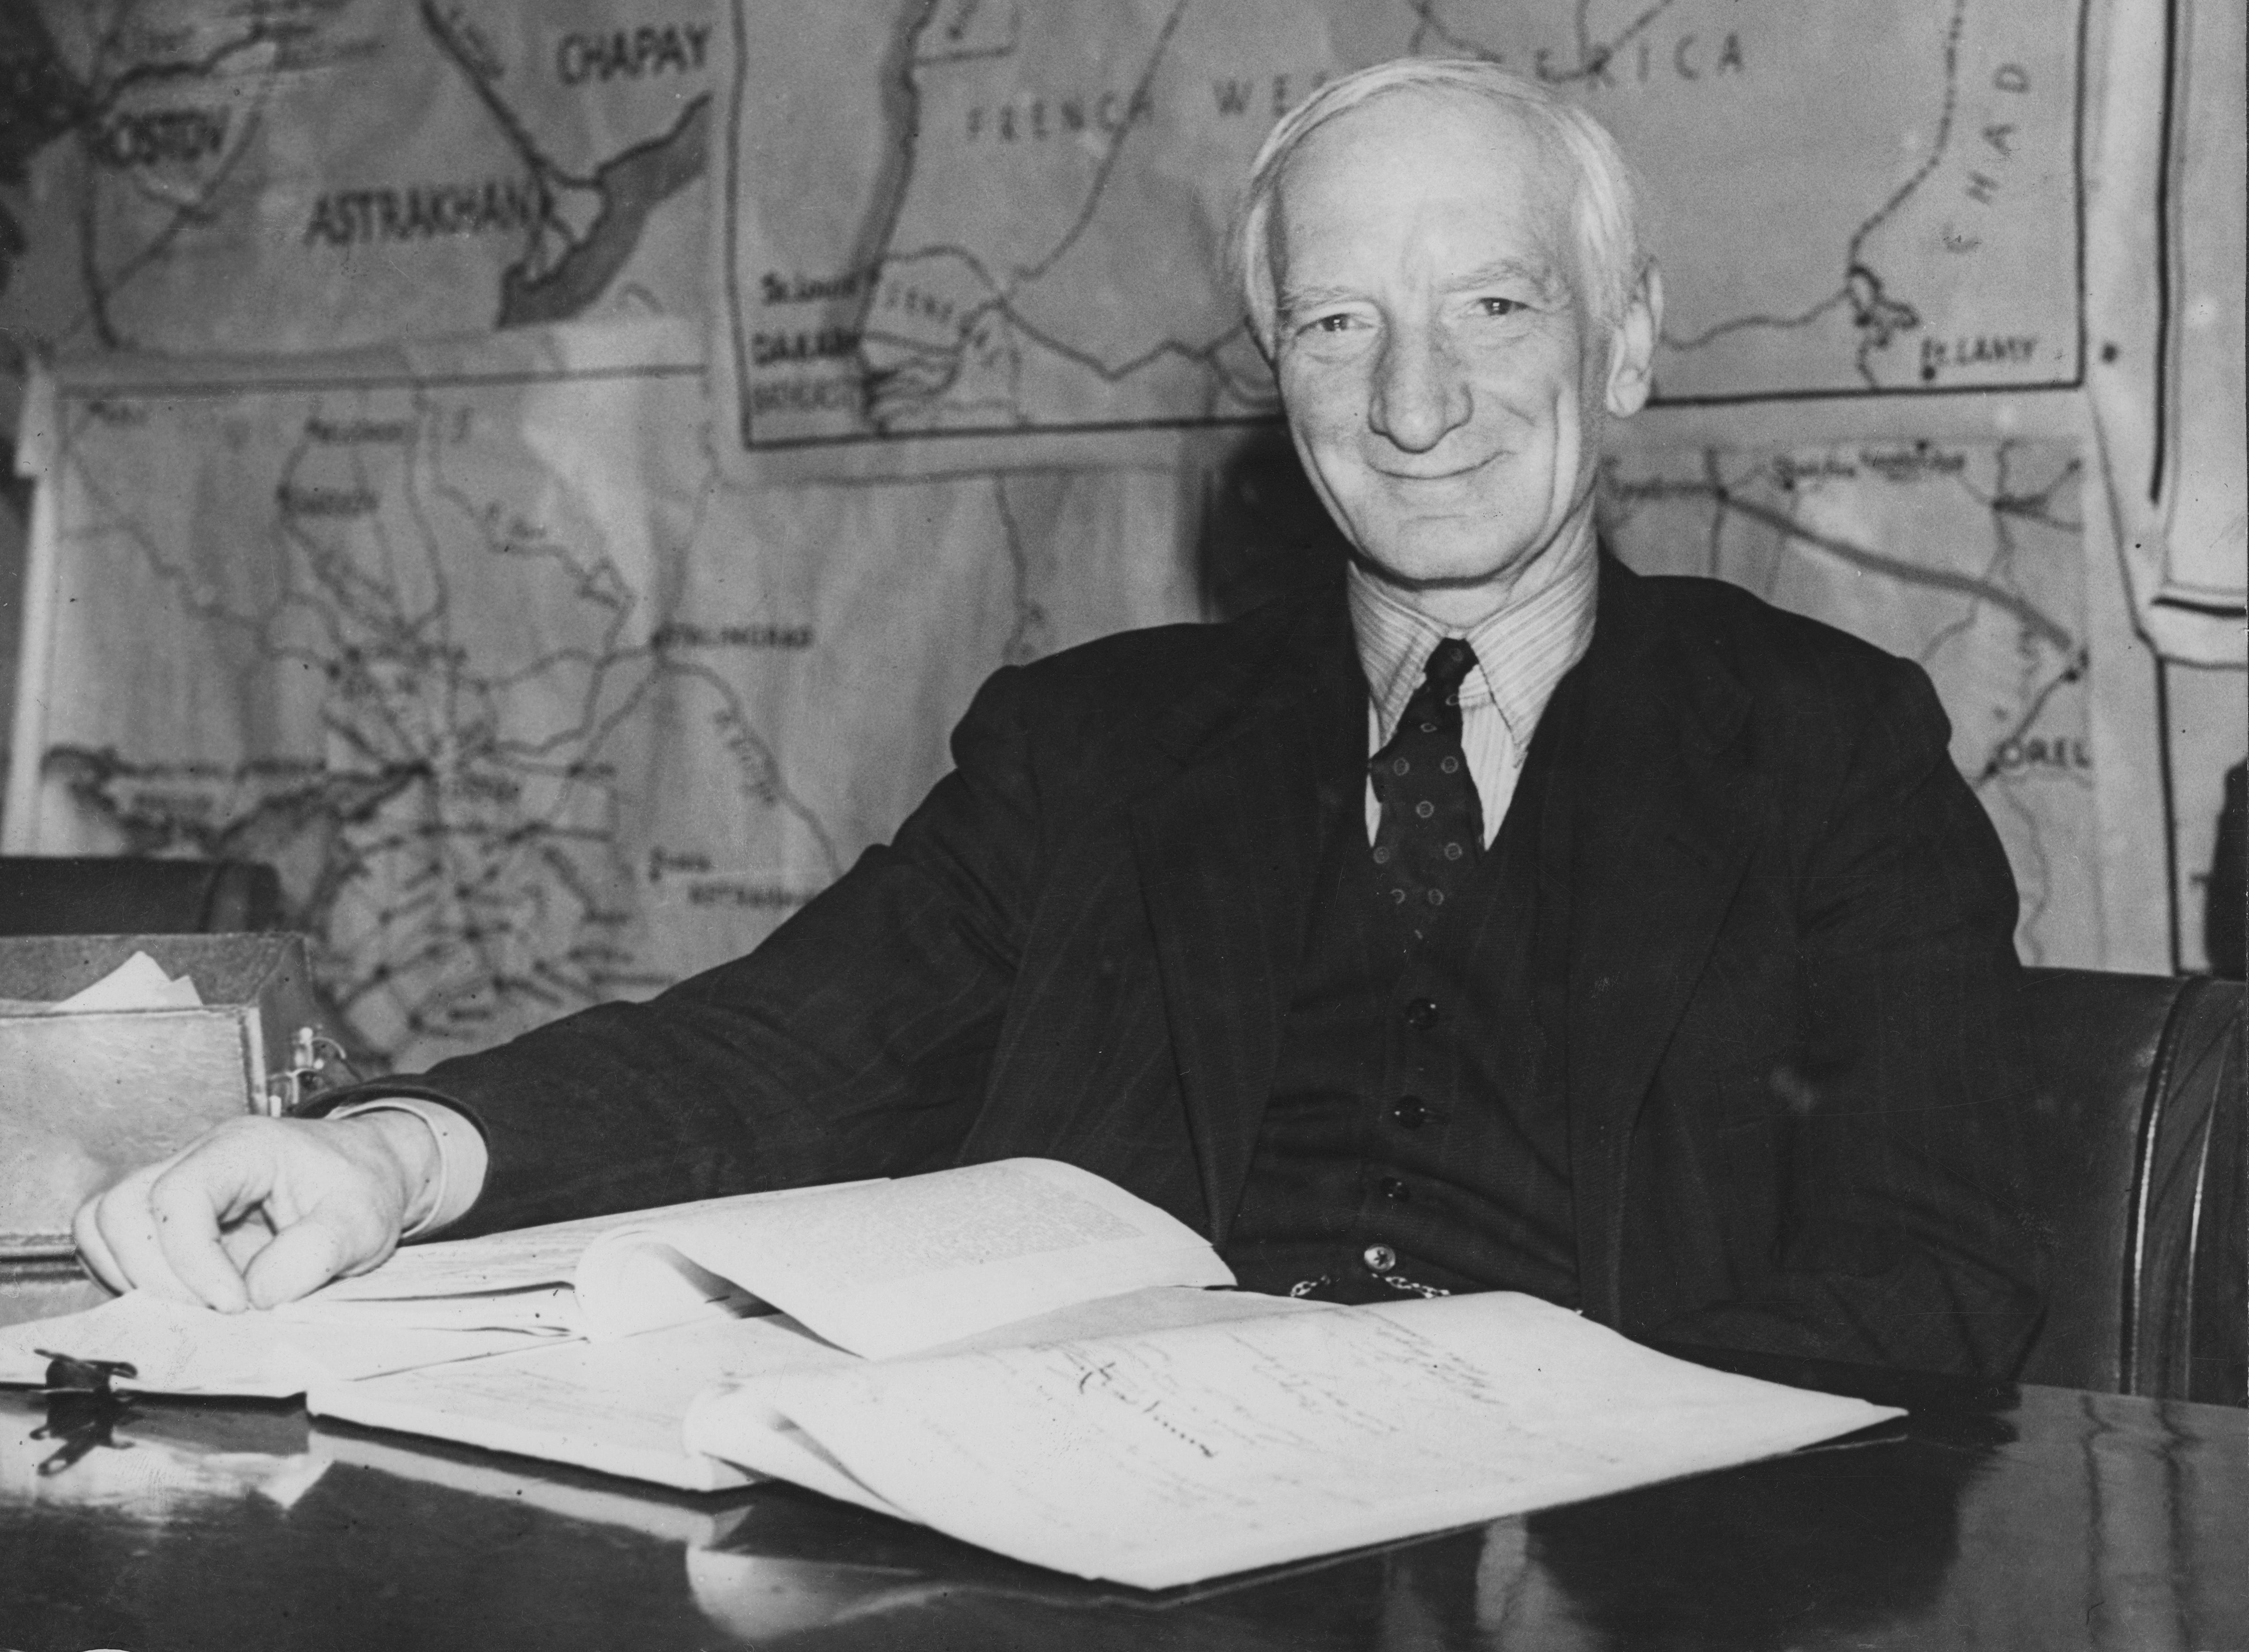 British economist and social reformer William Beveridge warned against ’patching’ – and believed his 1942 plan would deliver a guaranteed income